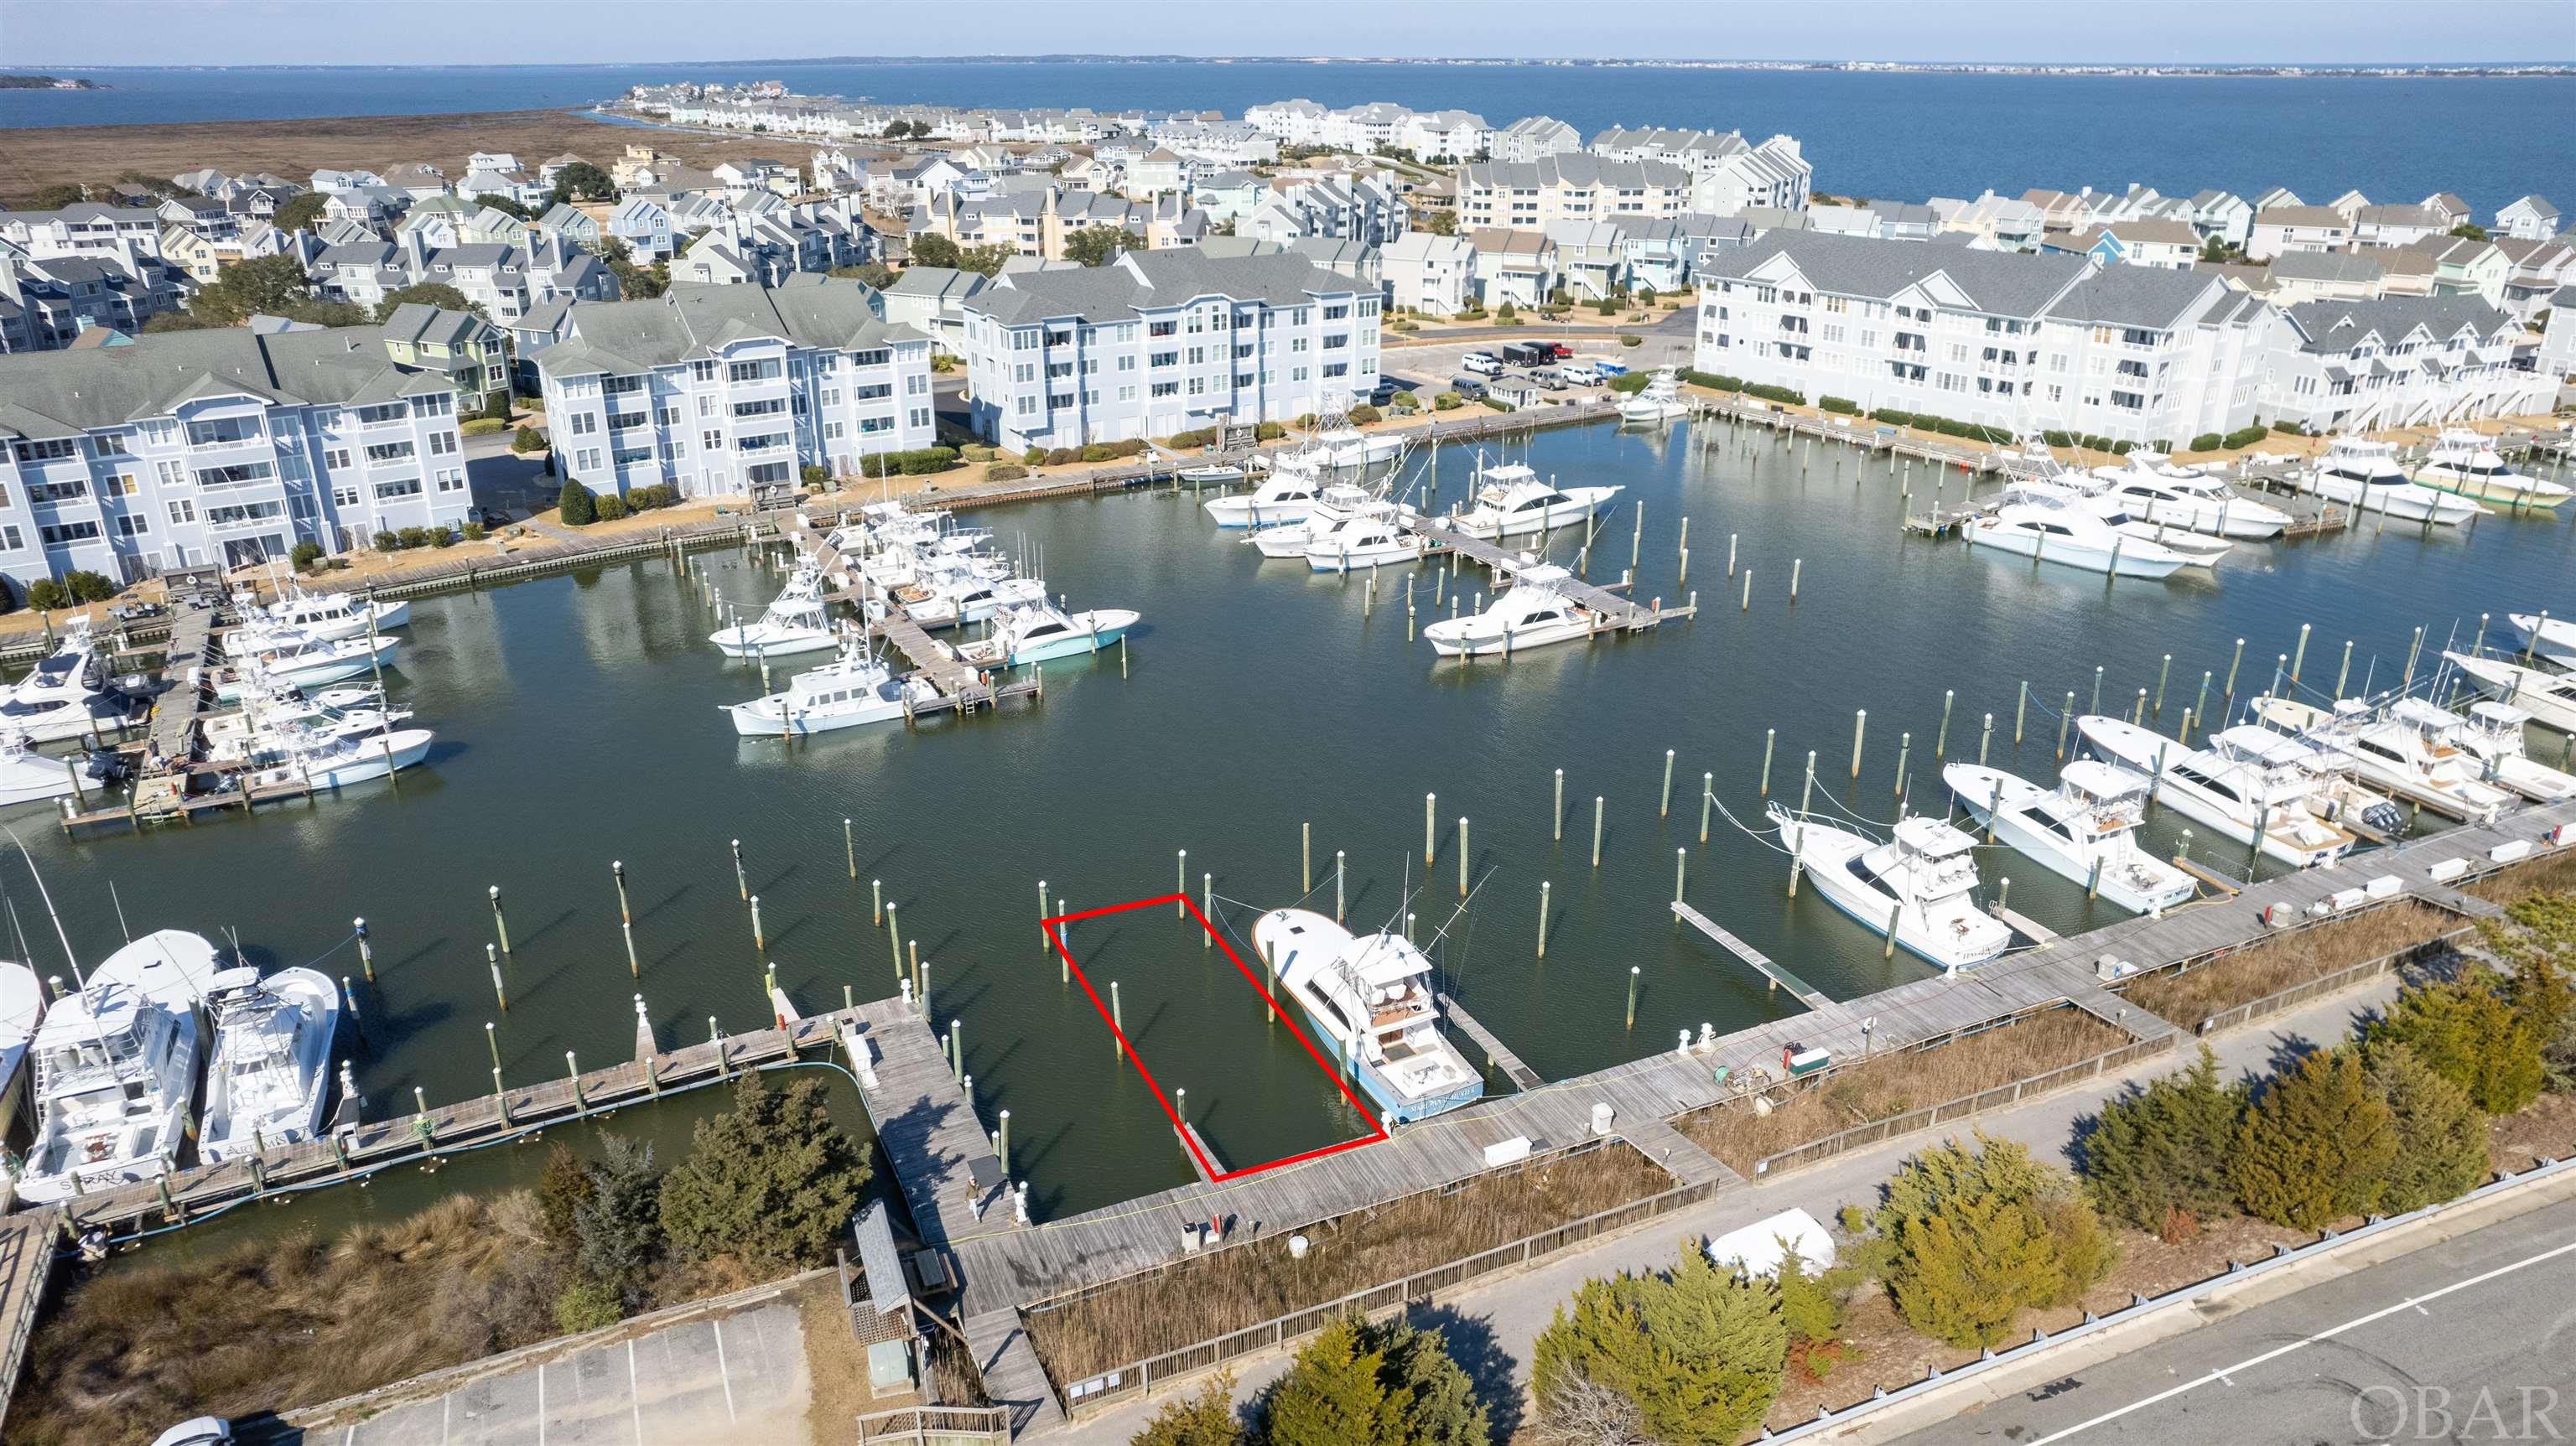 Located on G Dock, this 75FT x 23W boat slip has location value with easy sound access and parking.  Pirate's Cove Marina is a protected, deep water, full service marina with 195 slips and a charter fleet of sport fish boats for offshore, nearshore and inlet fishing.  Pirate's Cove Marina is one of the largest world-class marinas on the East Coast with a high level of experienced charter sport fishing captains and crew. Pirate's Cove Marina offers: a fuel dock for non-ethanol gas and diesel, slips with in-slip fueling, private fish cleaning houses, showers, Ship's Store for light provisioning, an on-site full-service restaurant and Tiki Bar, and annual fishing tournaments.  Pirate's Cove Marina is approximately eight miles inside and north of Oregon Inlet via a deepwater, well-marked channel. The fixed bridge clearance of the Manteo/Nags Head causeway is 65 feet at mean high tide.